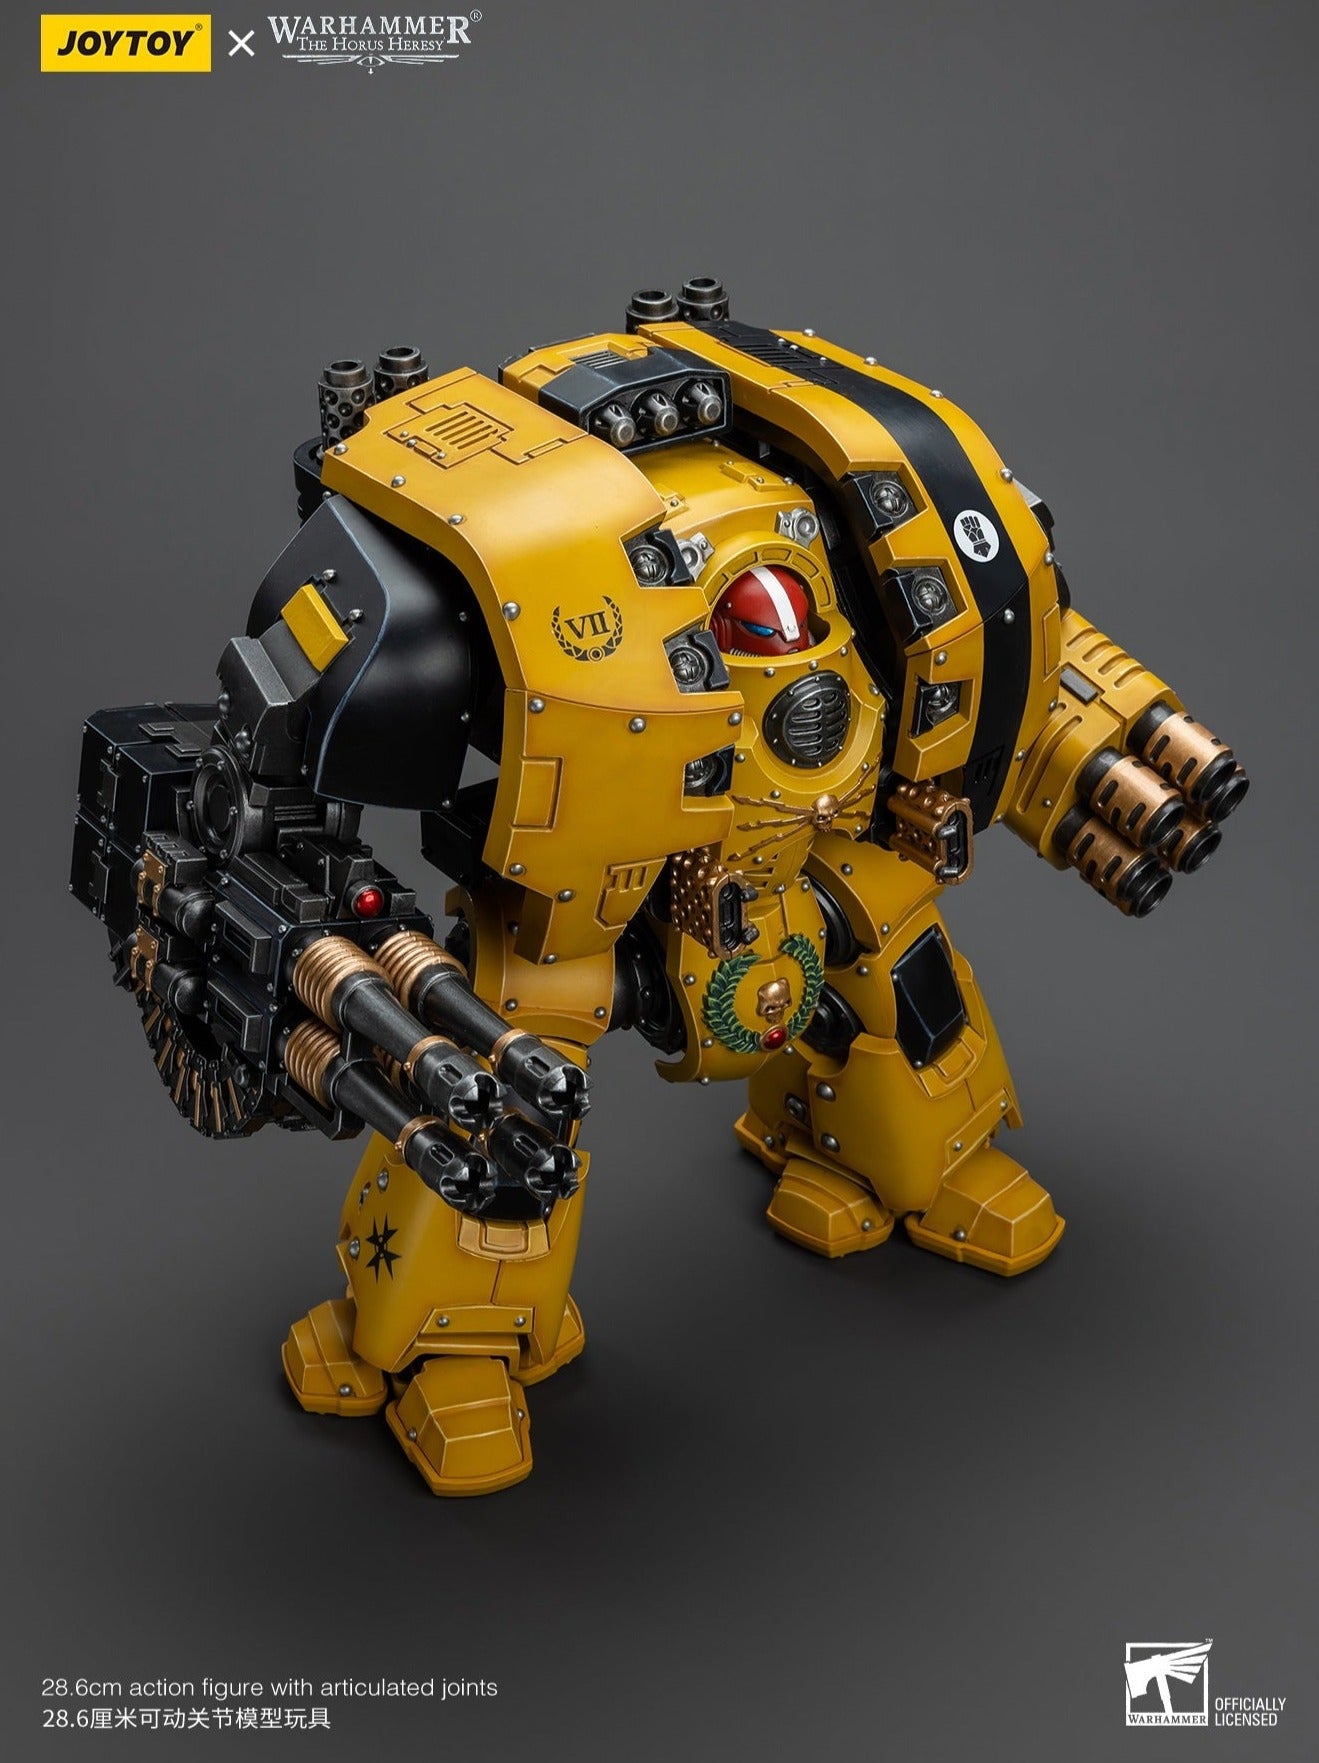 Warhammer The Horus Heresy: Imperial Fists Leviathan Dreadnought with Cyclonic Melta Lance and Storm Cannon: Joy Toy